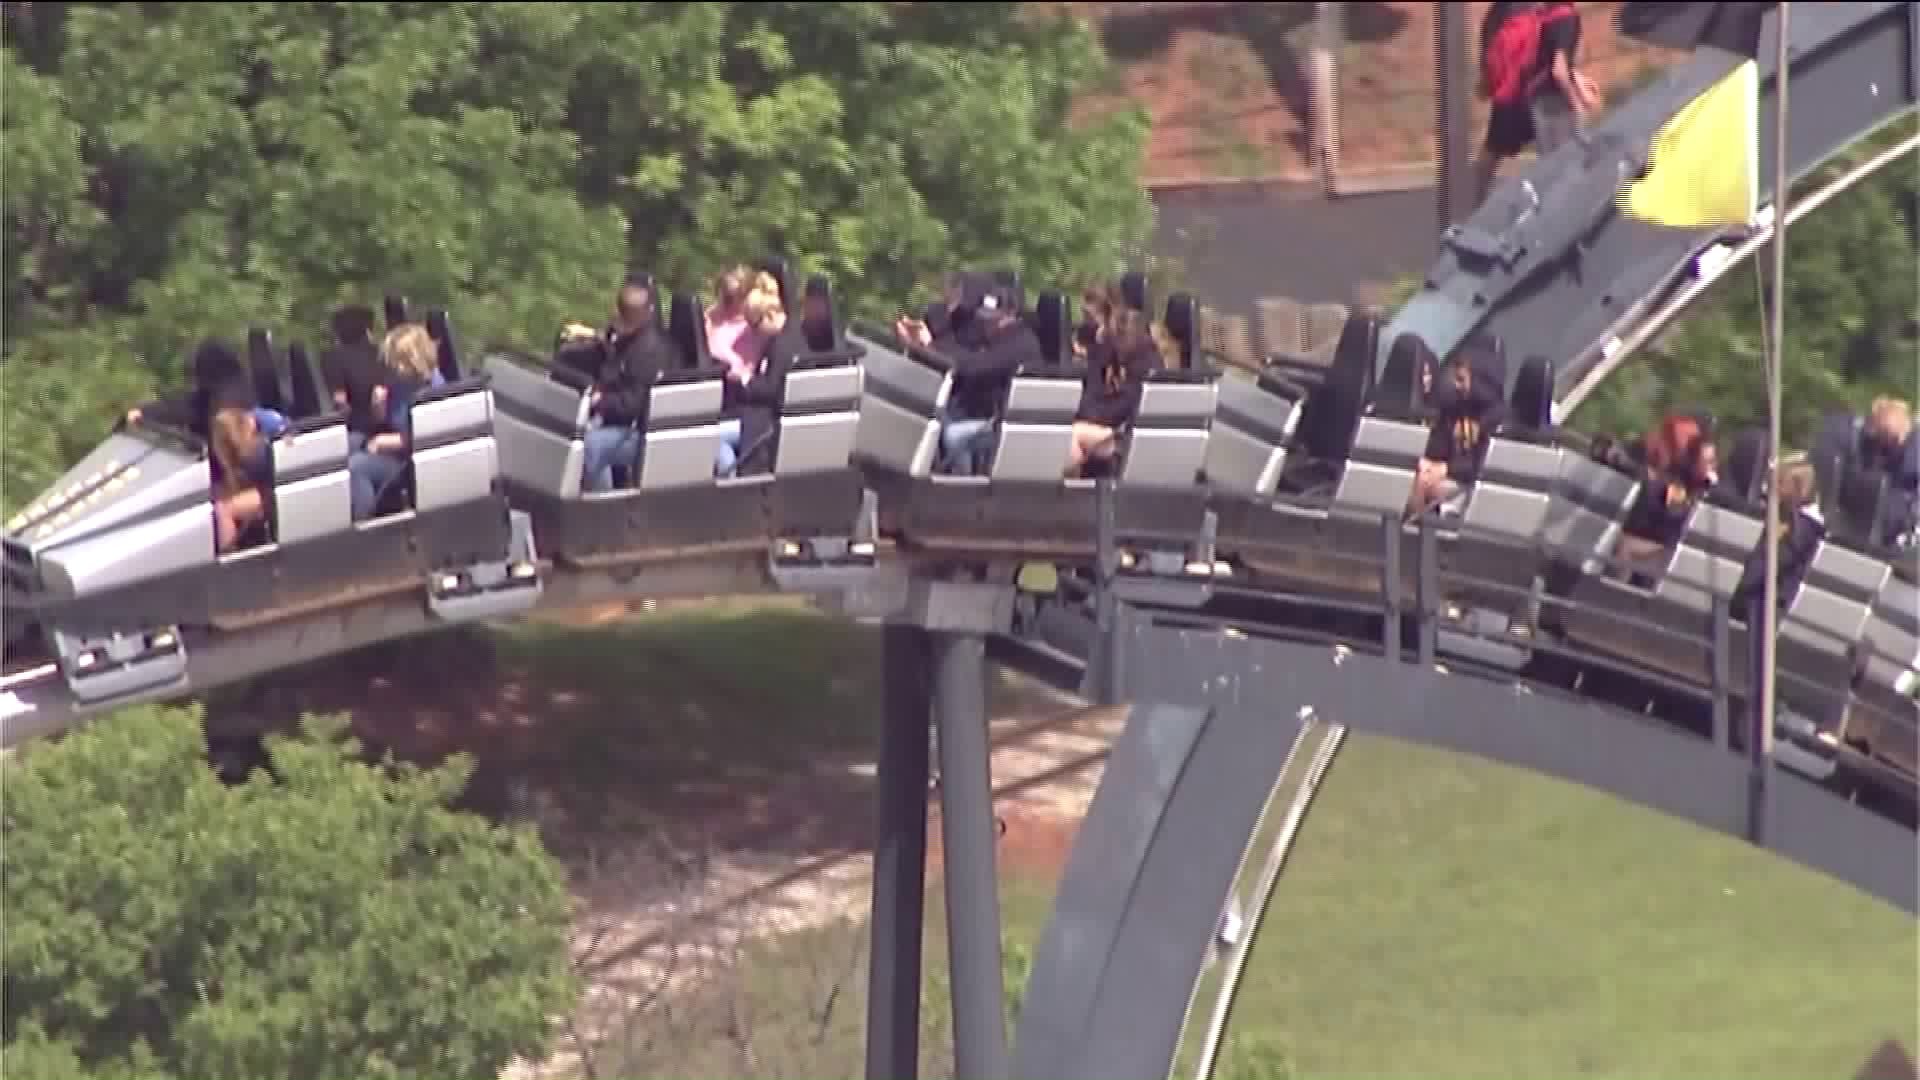 Silver Bullet stuck again at Frontier City